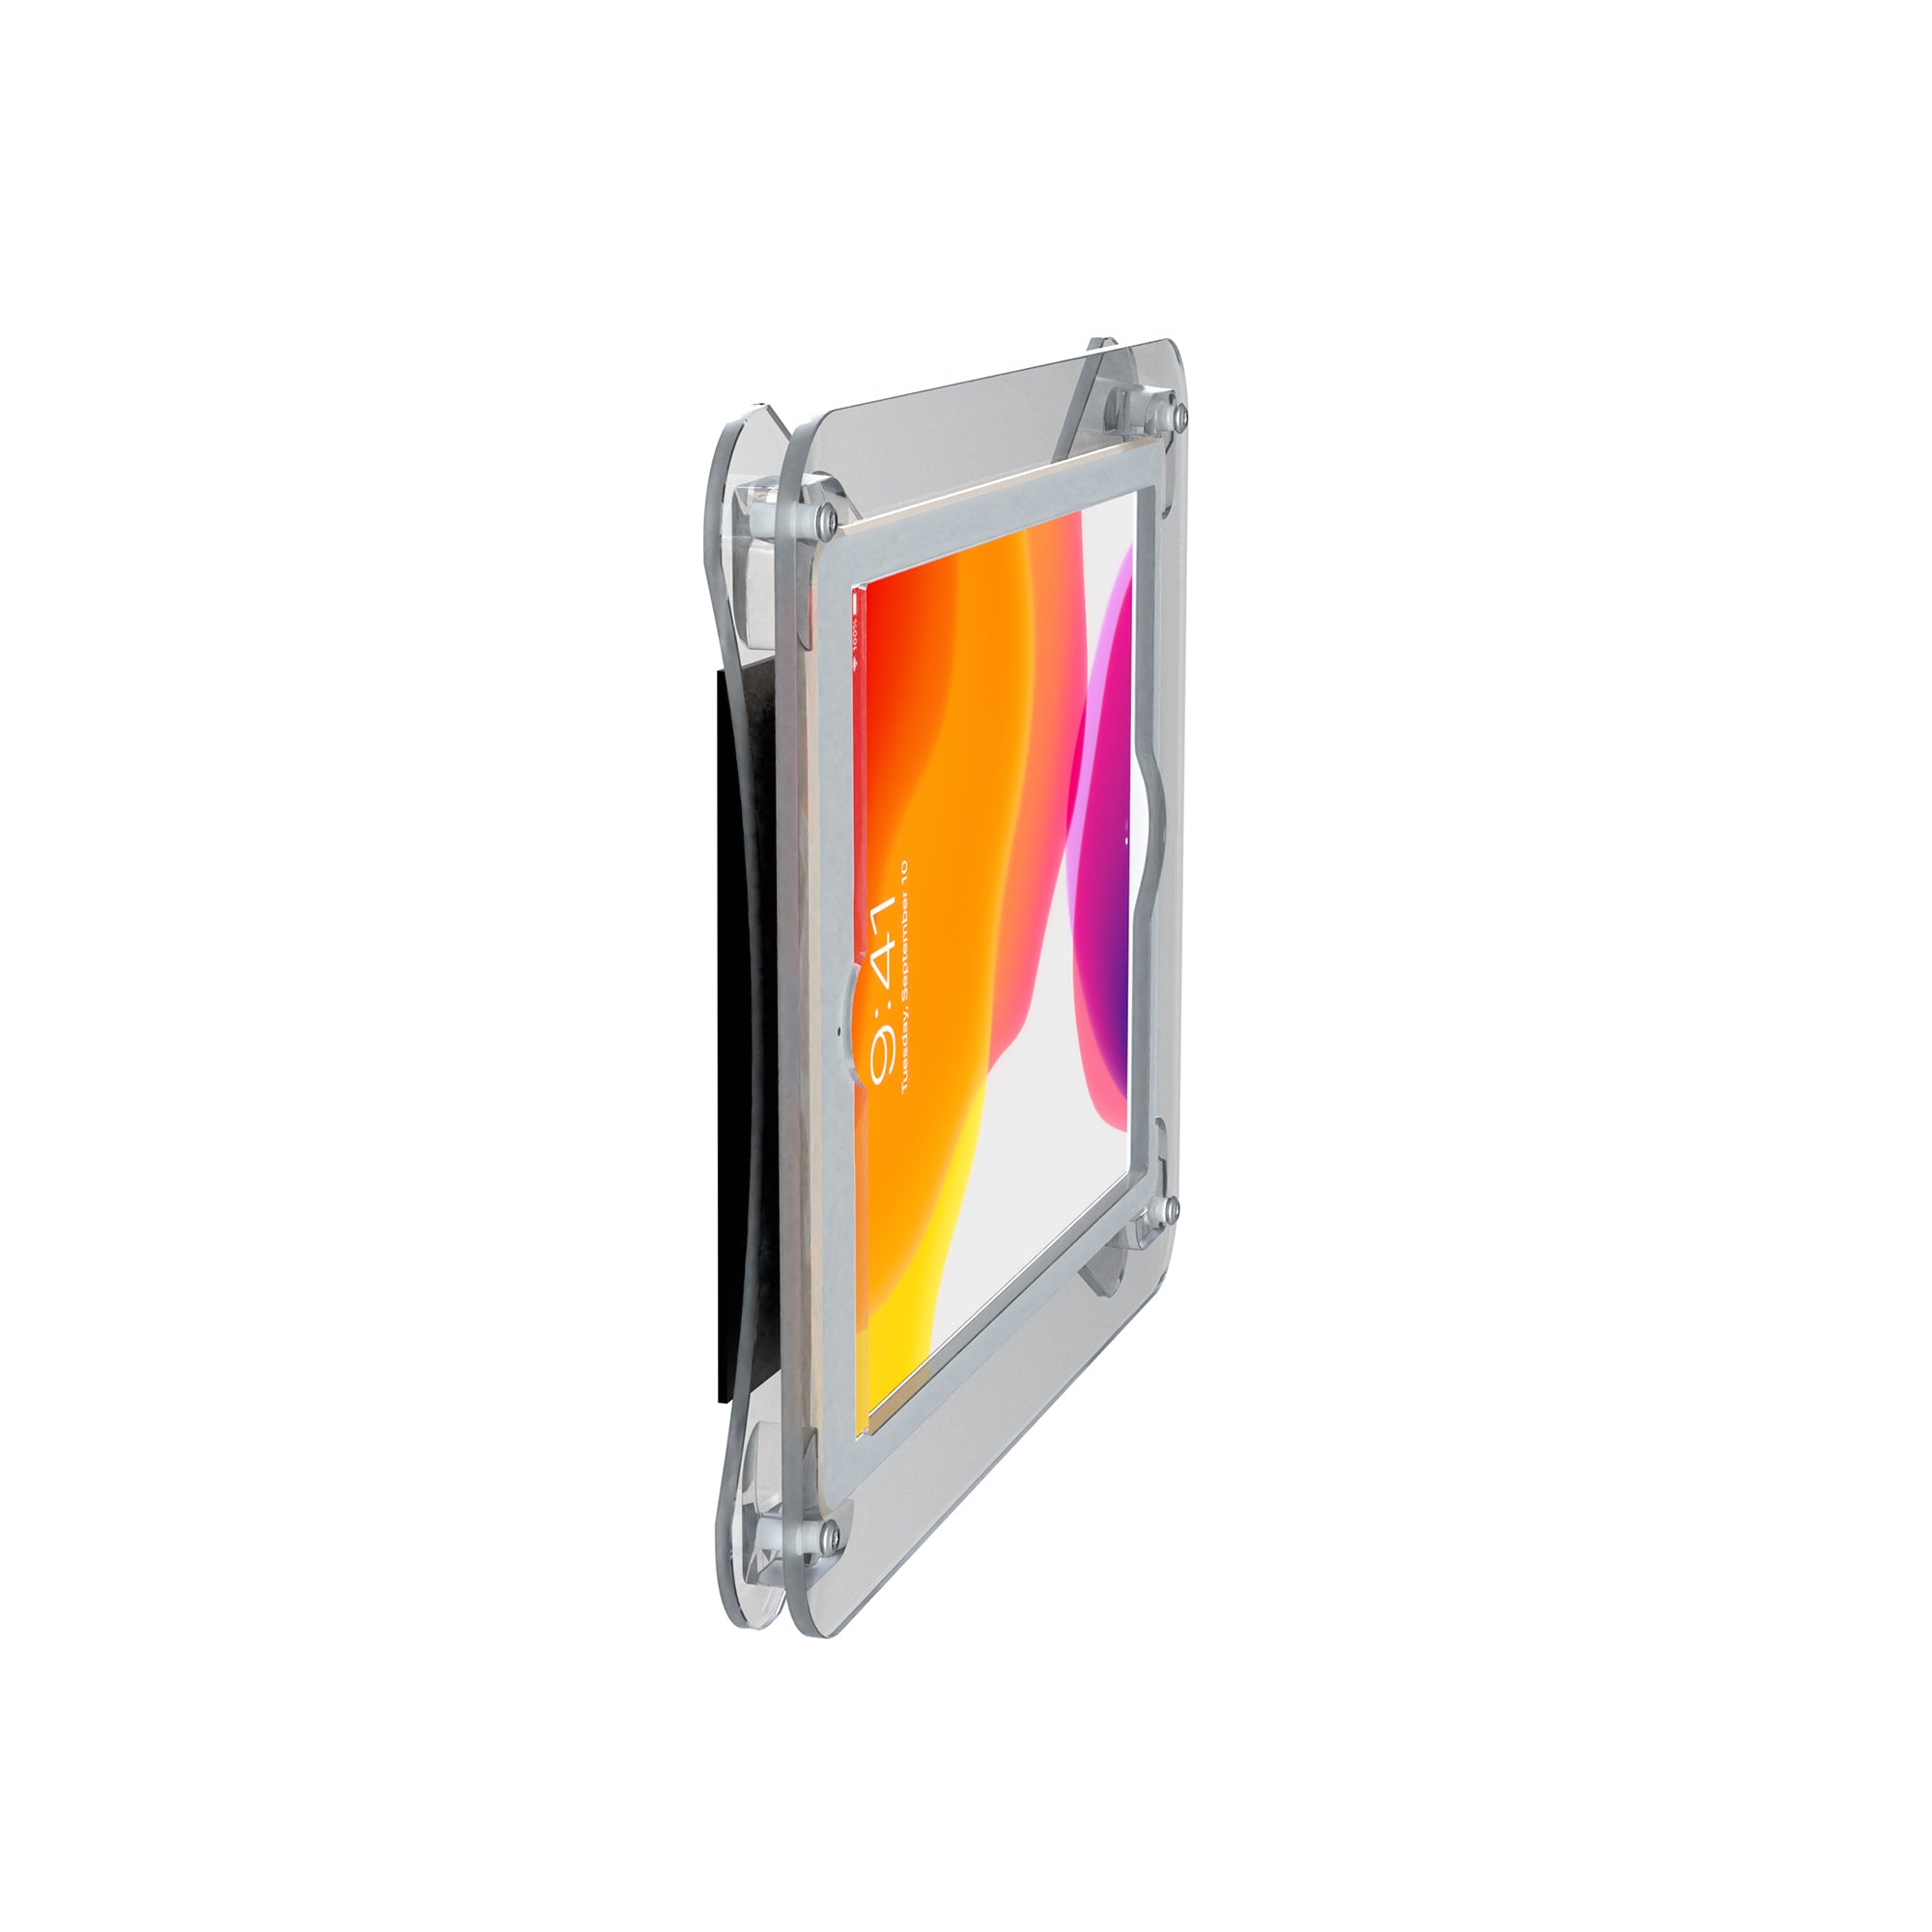 Premium Security Translucent Acrylic Wall Mount for 10.2-inch iPad 7th/ 8th/ 9th Gen & More